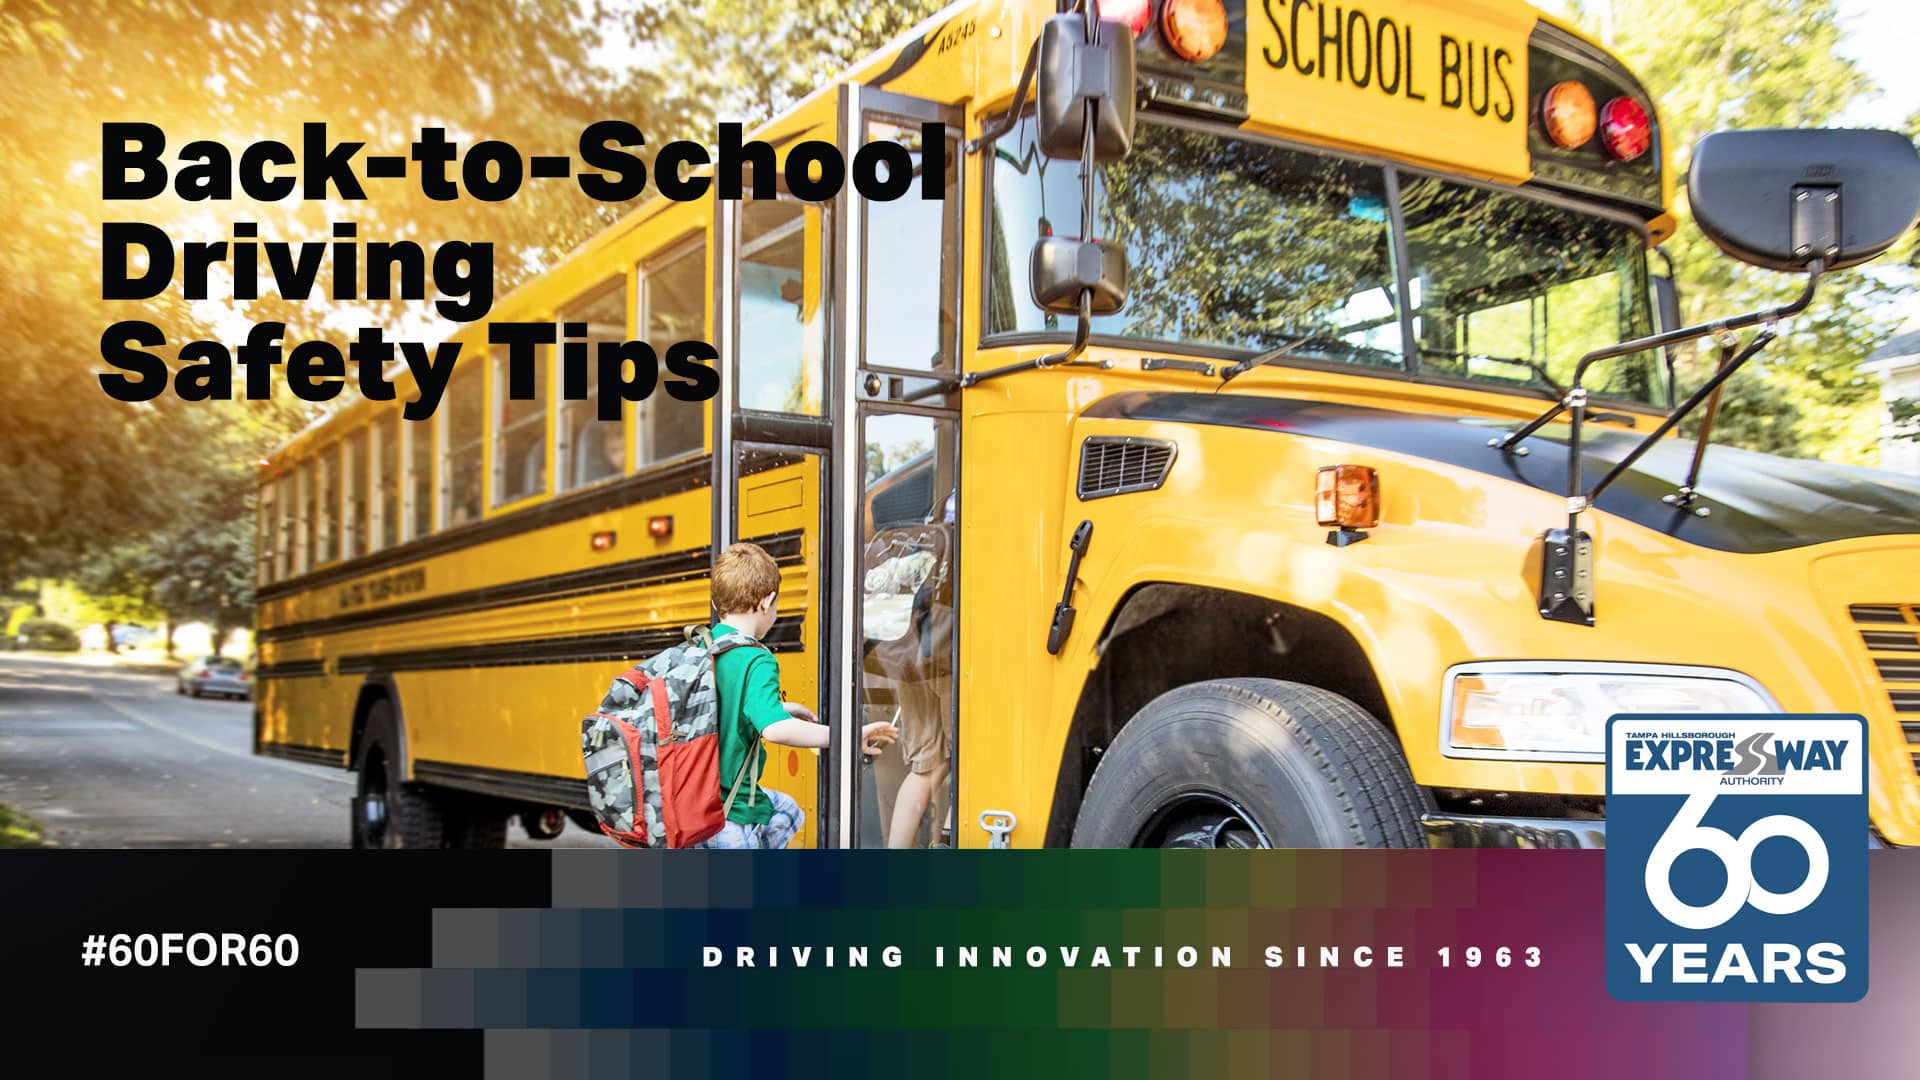 Back-to-School Driving Safety Tips